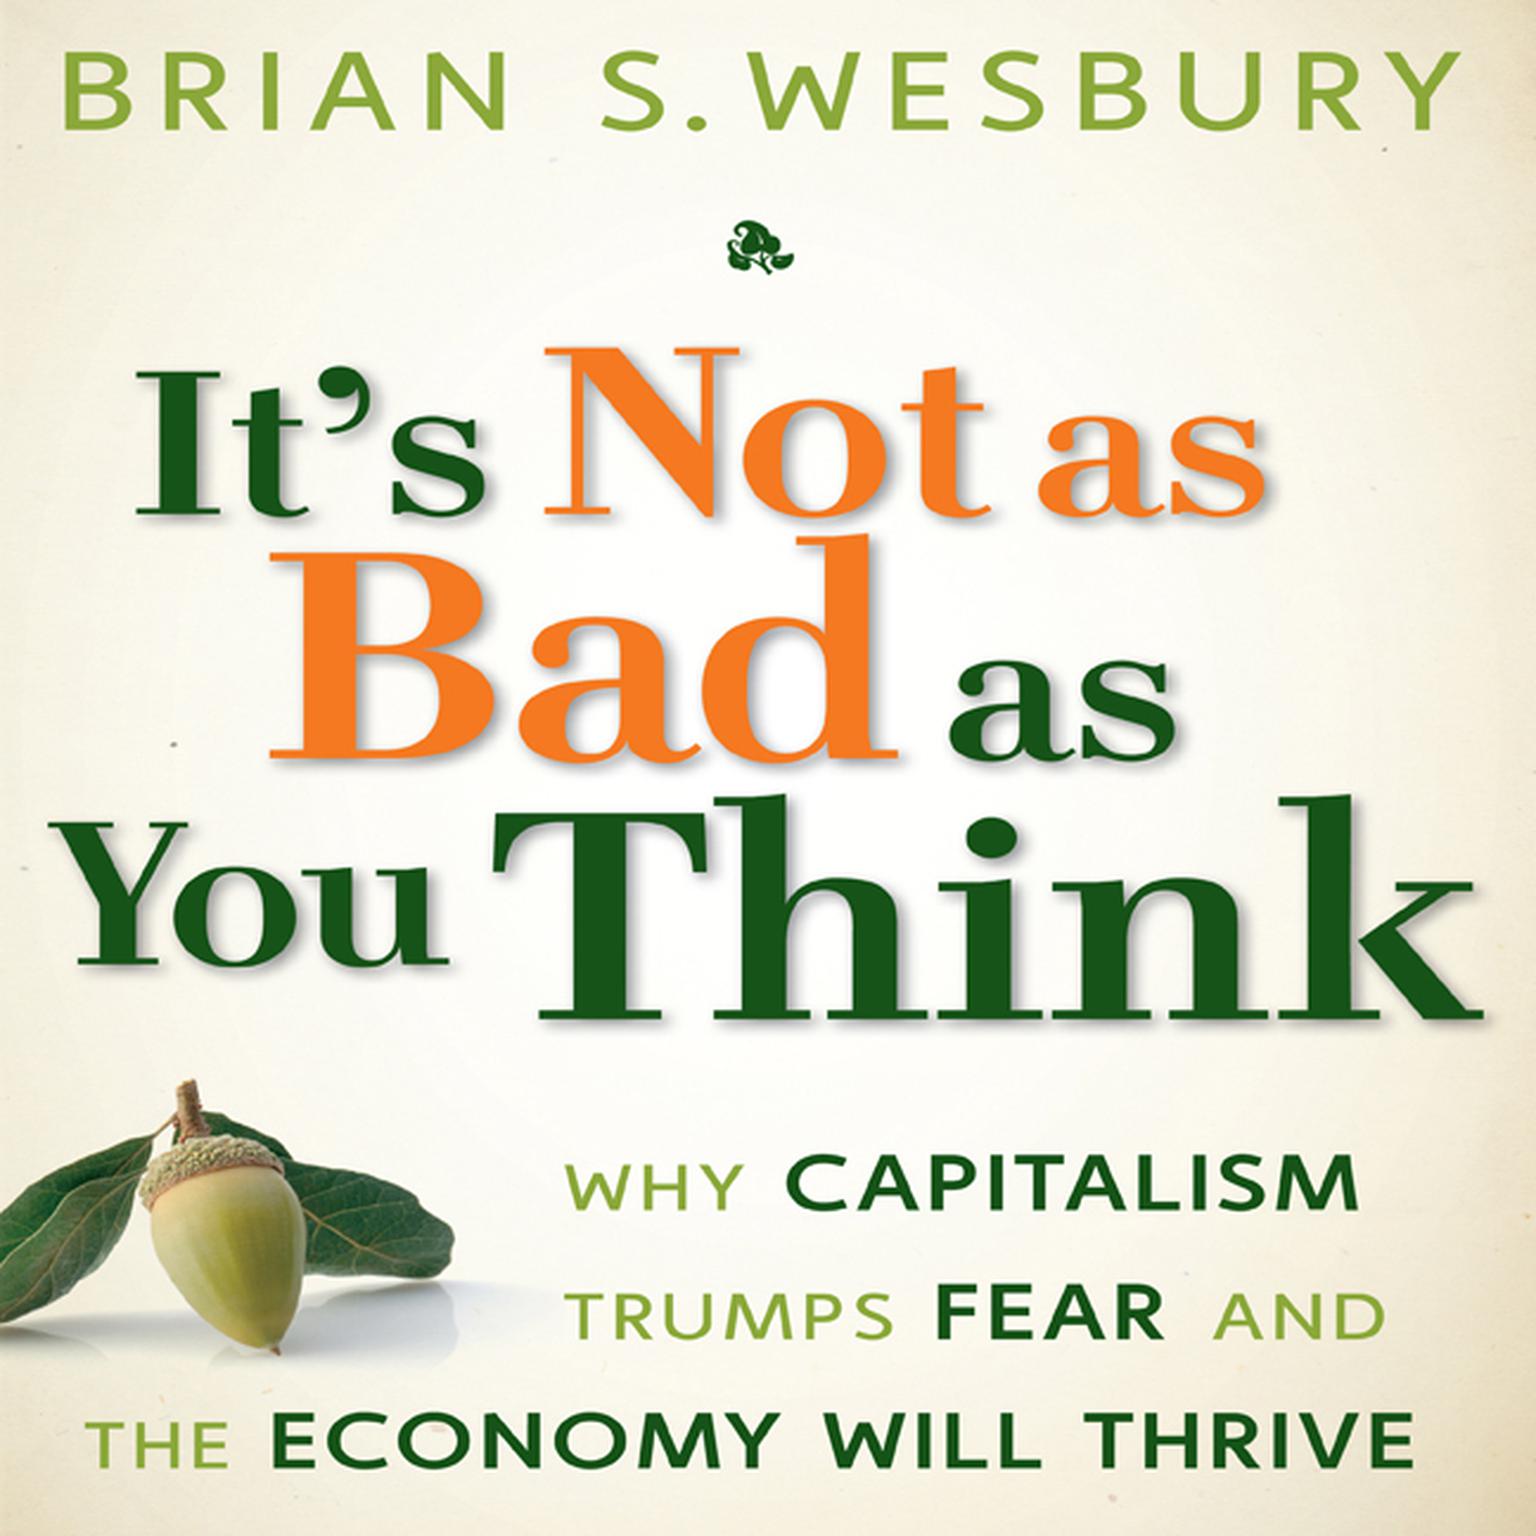 Its Not as Bad as You Think: Why Capitalism Trumps Fear and the Economy Will Thrive Audiobook, by Brian S. Wesbury